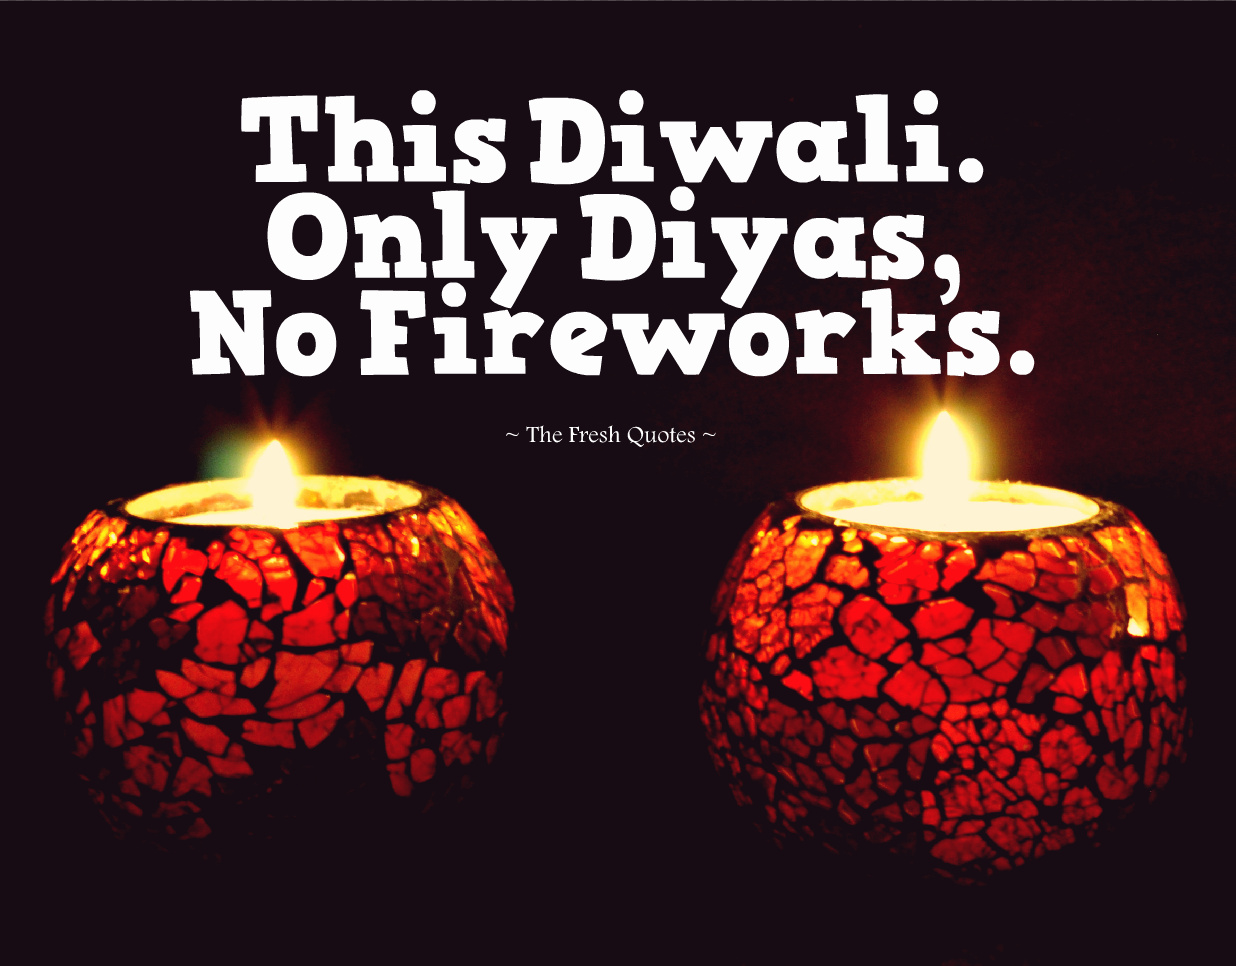 First of all Wishing you all a very Happy Diwali From the entire team of Hiyaa’s Vet Clinic!